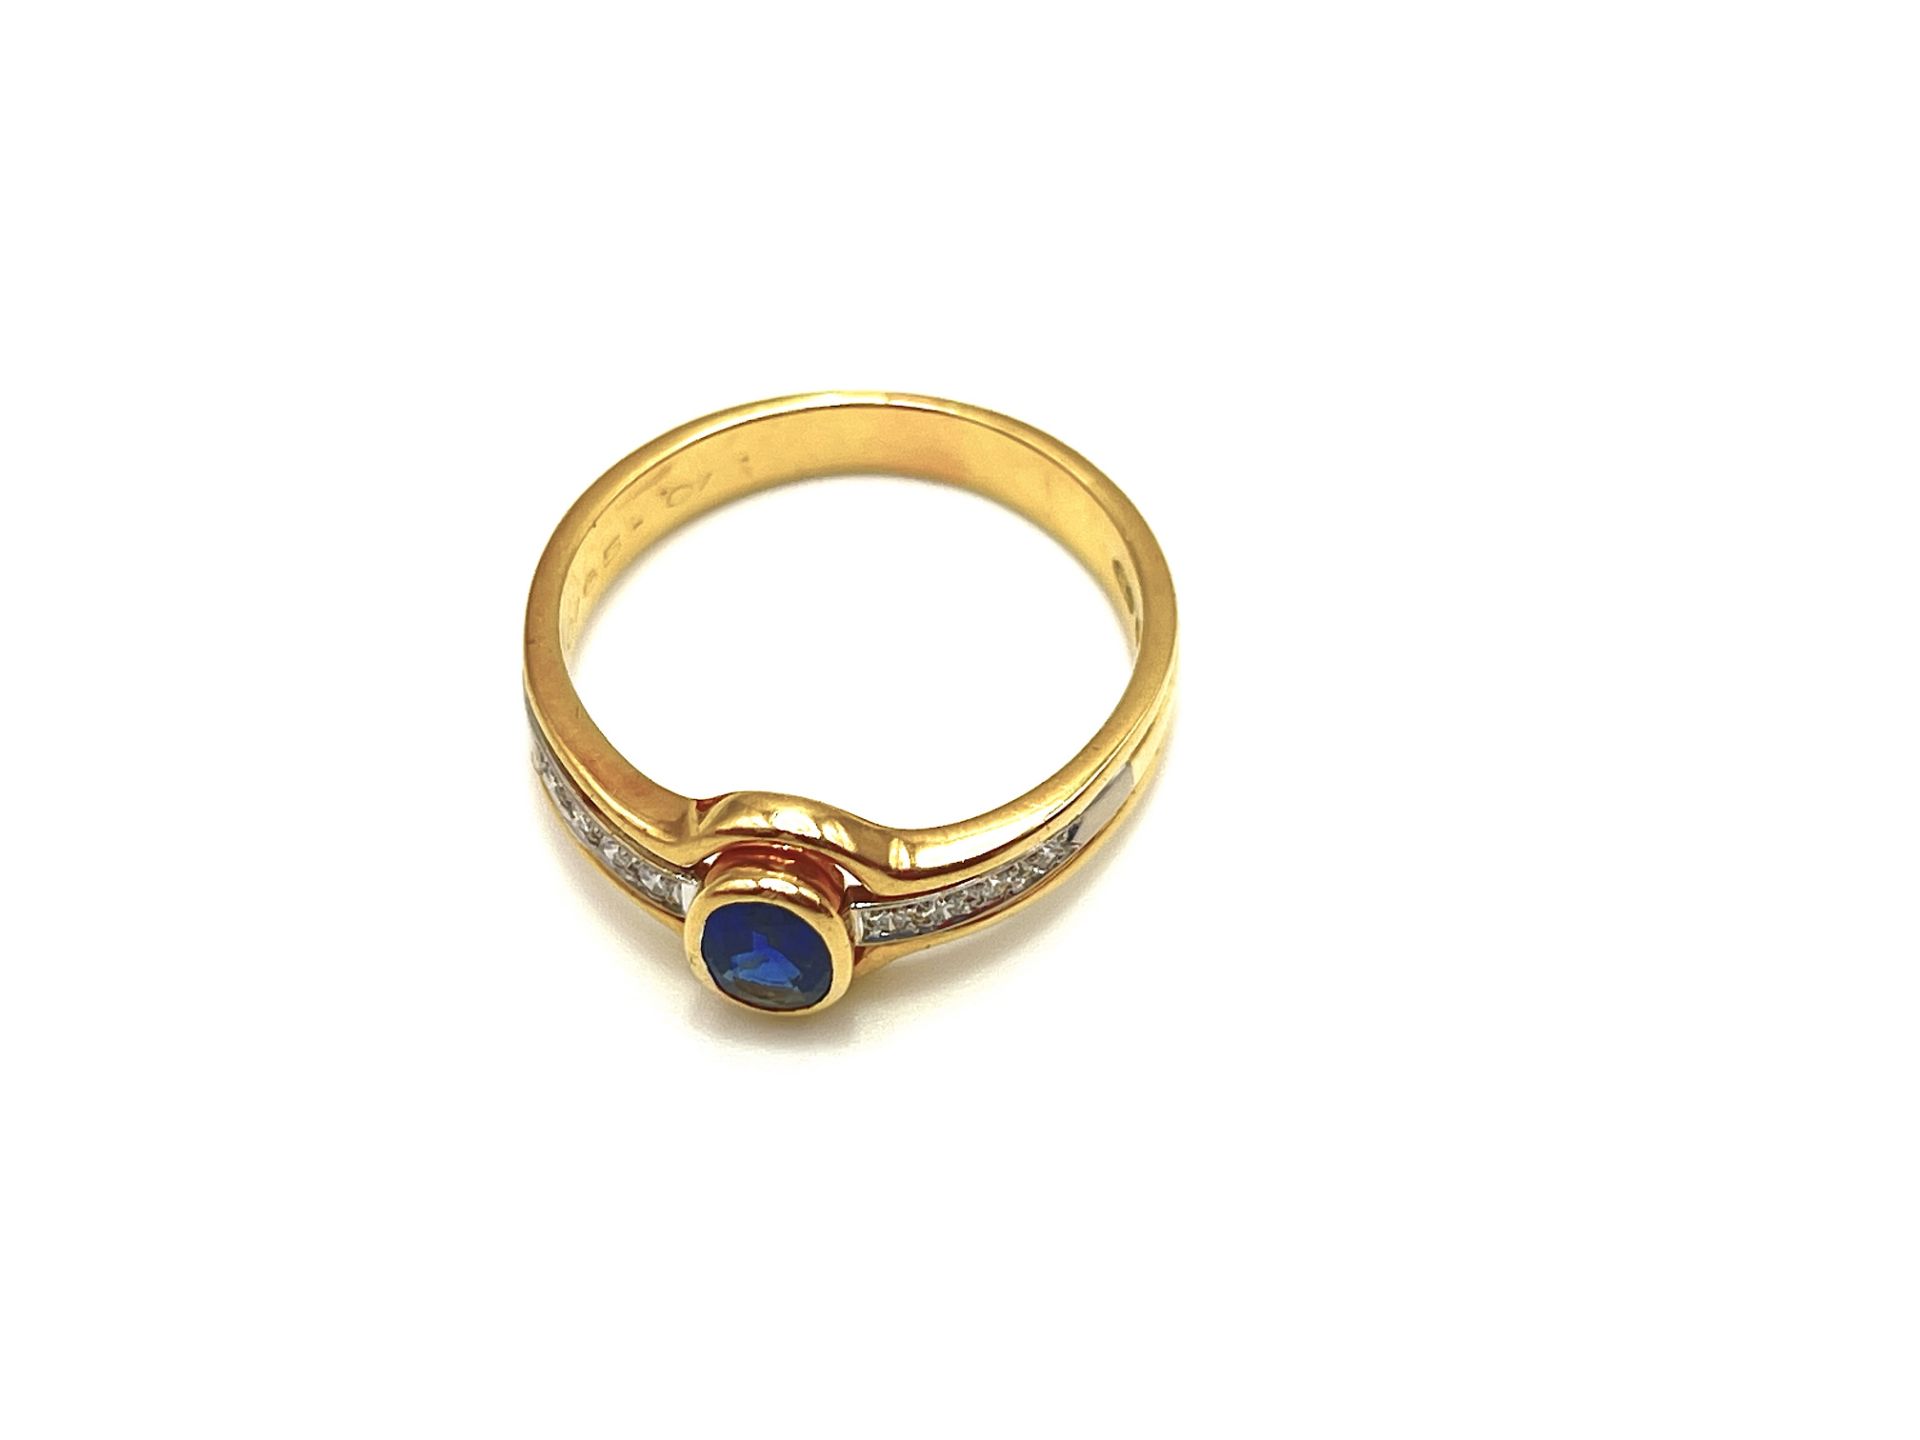 Sapphire ring with brillant-cut diamonds - Image 6 of 8